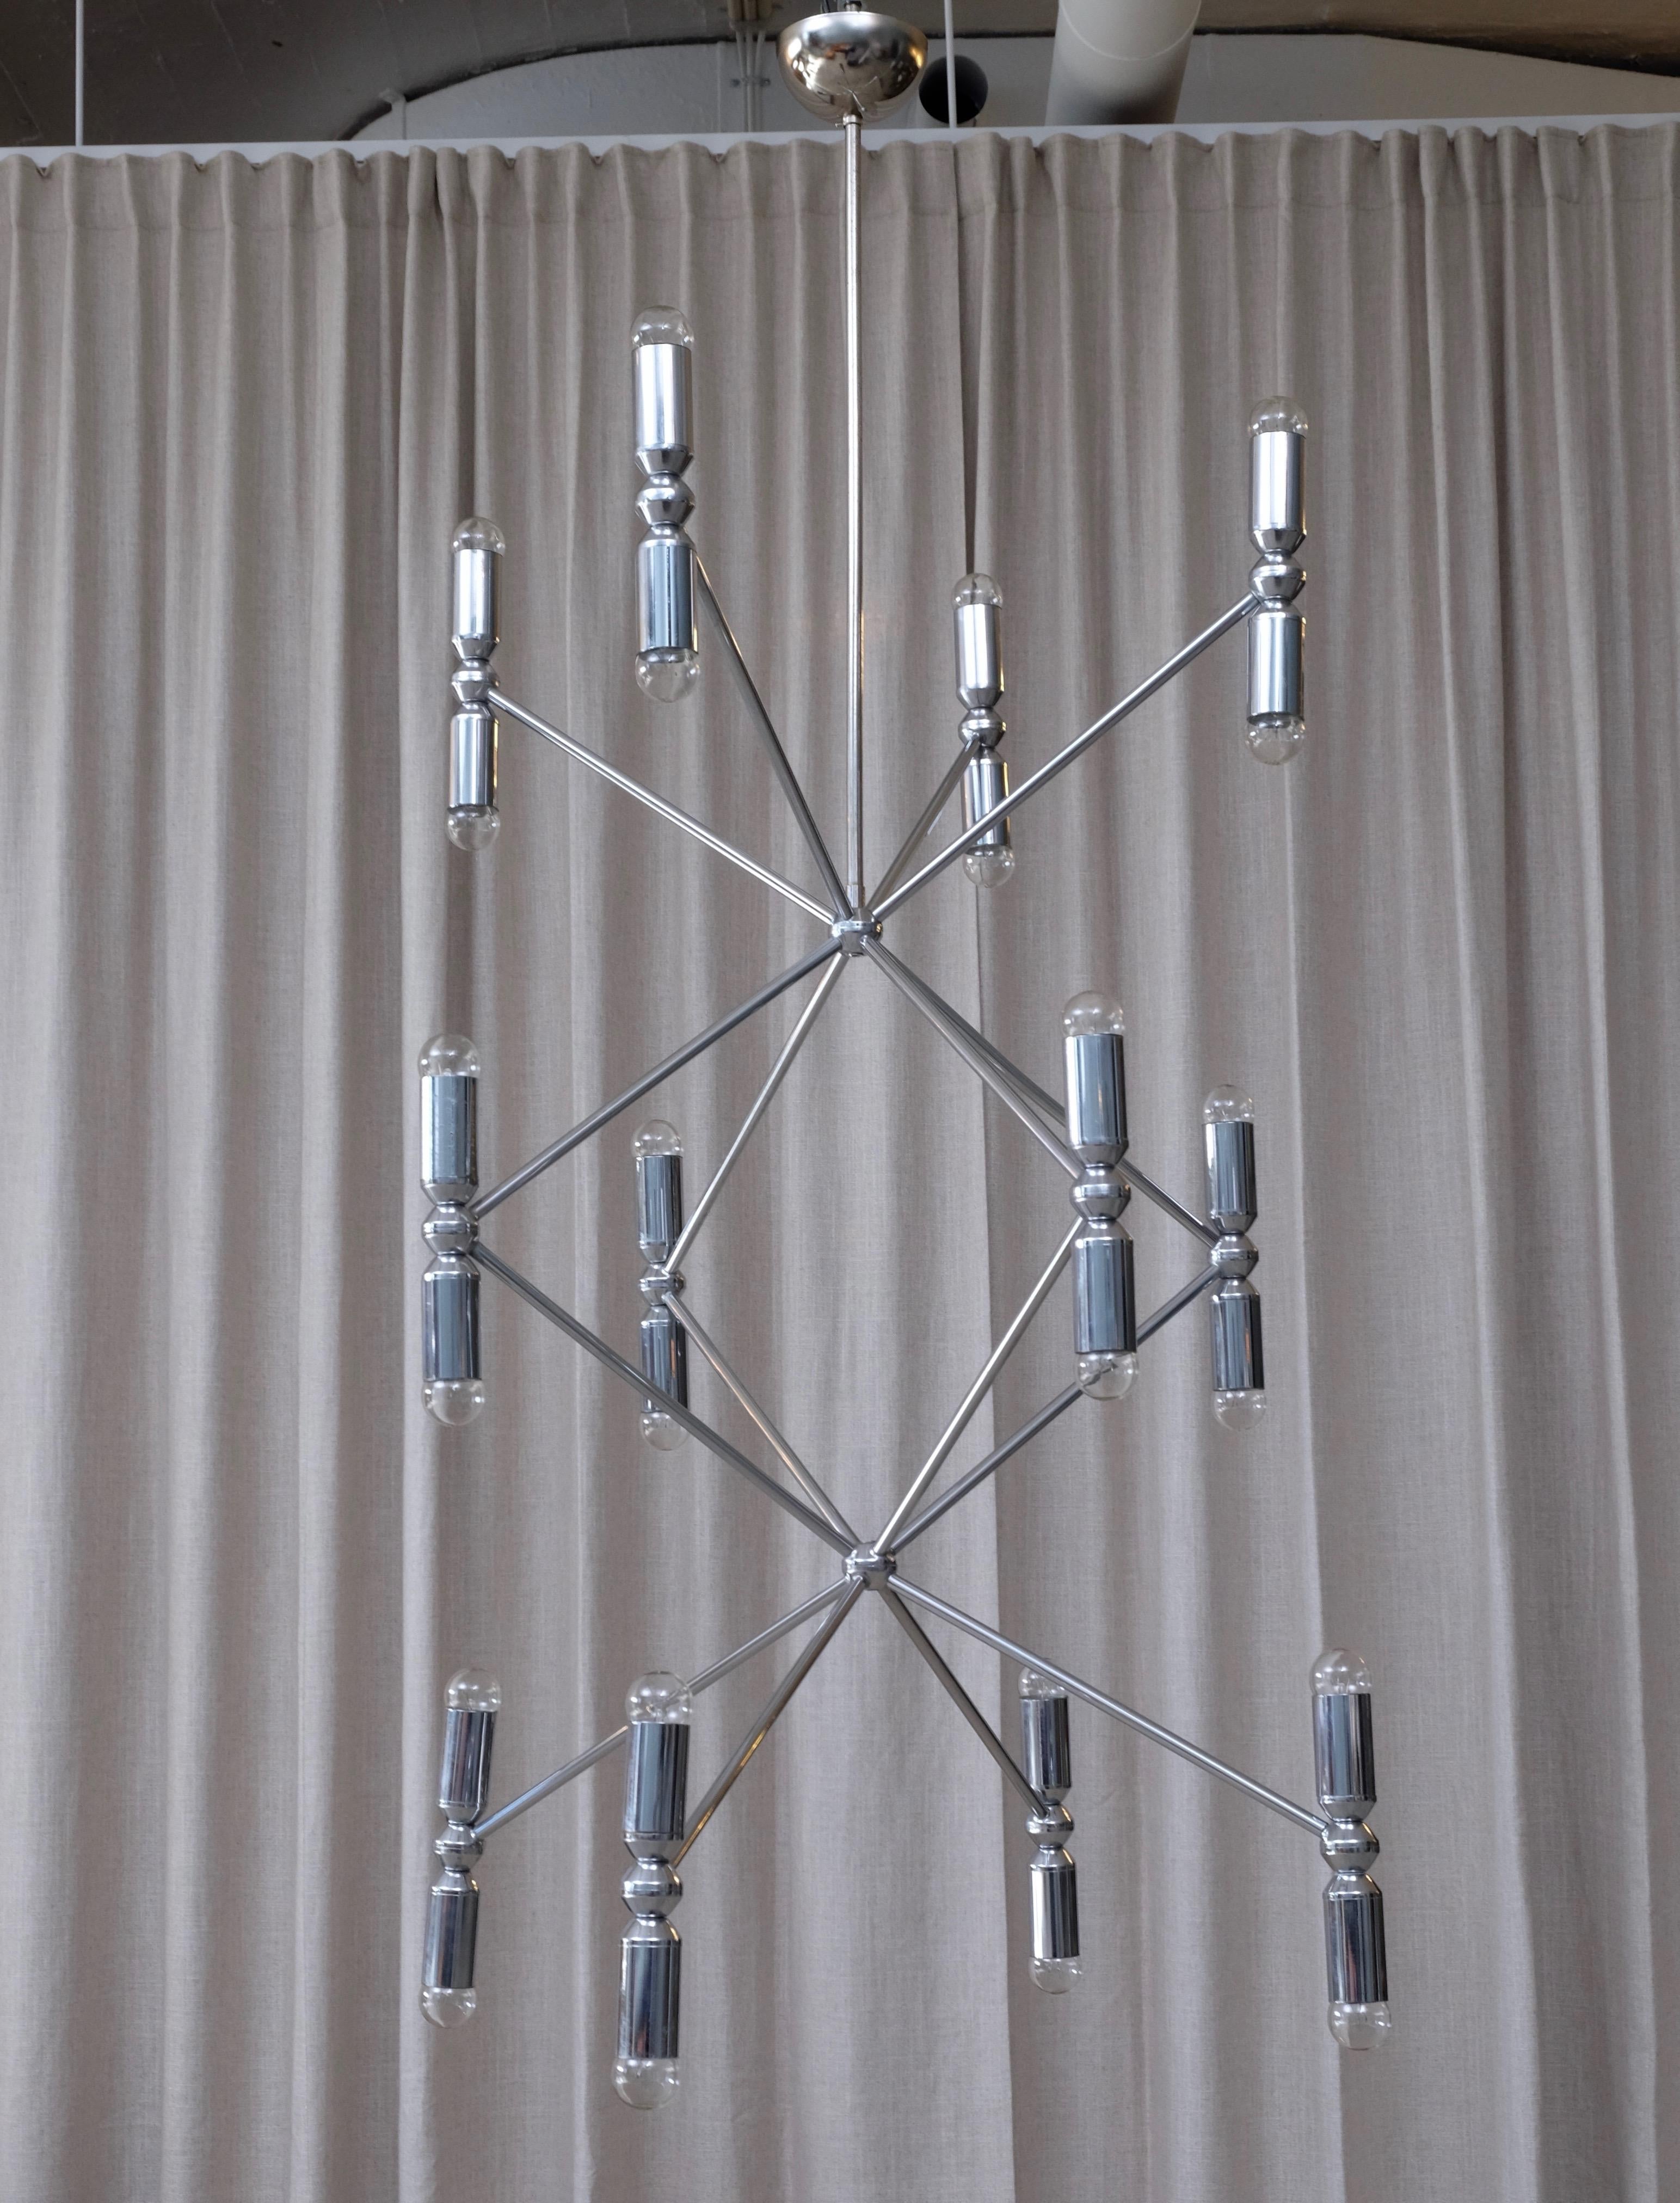 Rare 12-Arm Chandelier with 24 Lights in Chrome, 1970s For Sale 5